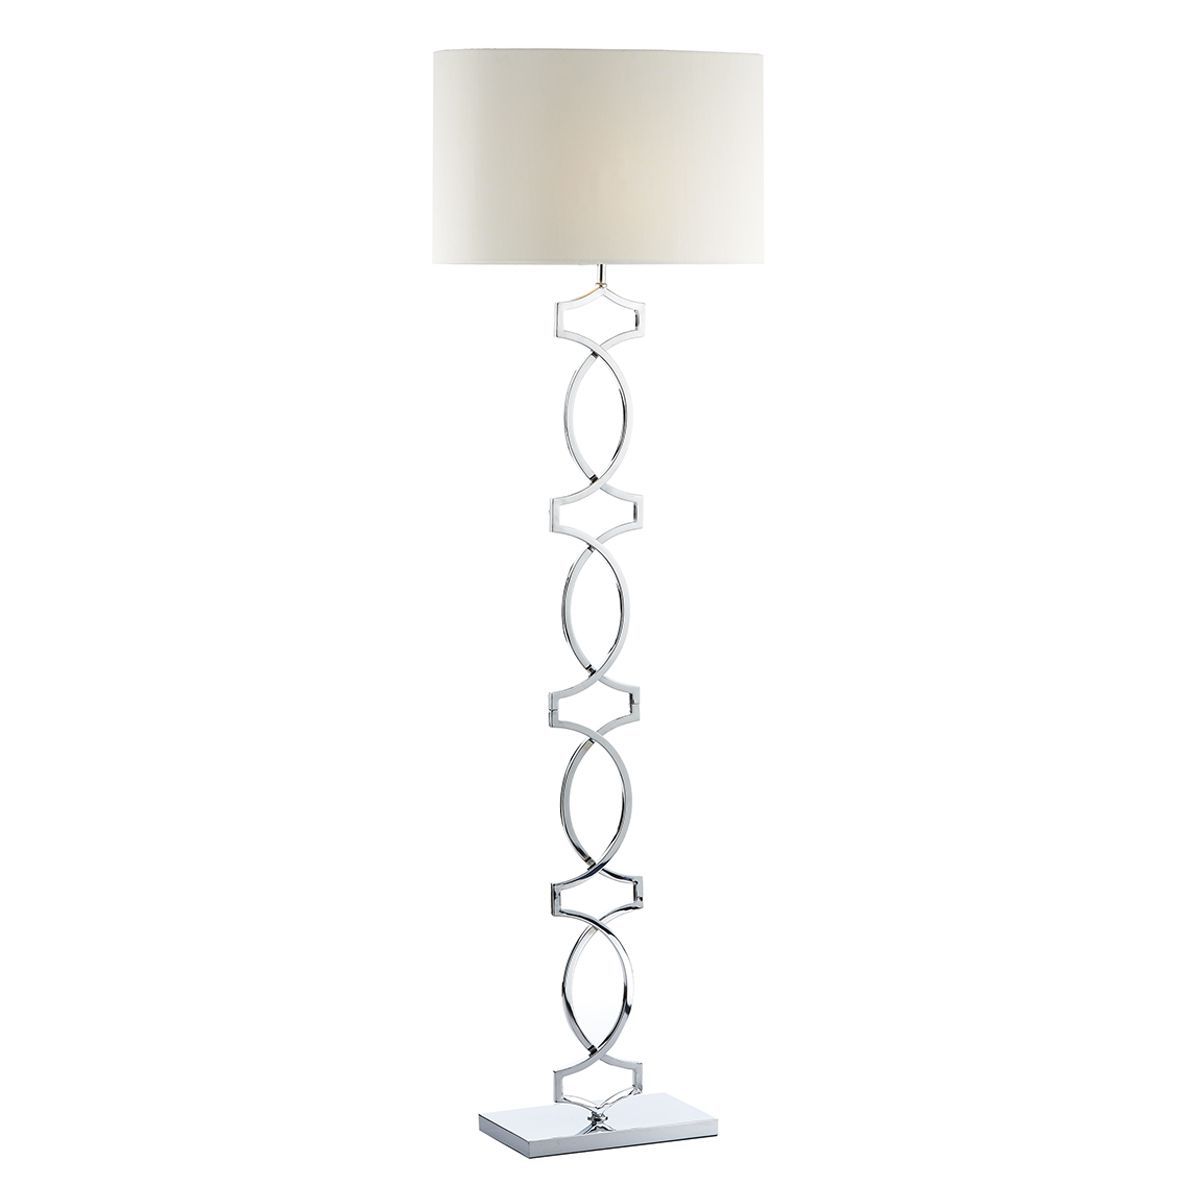 Preferred Donovan Floor Lamp Polished Chrome Complete With Shade Inside Chrome Floor Lamps (View 6 of 15)